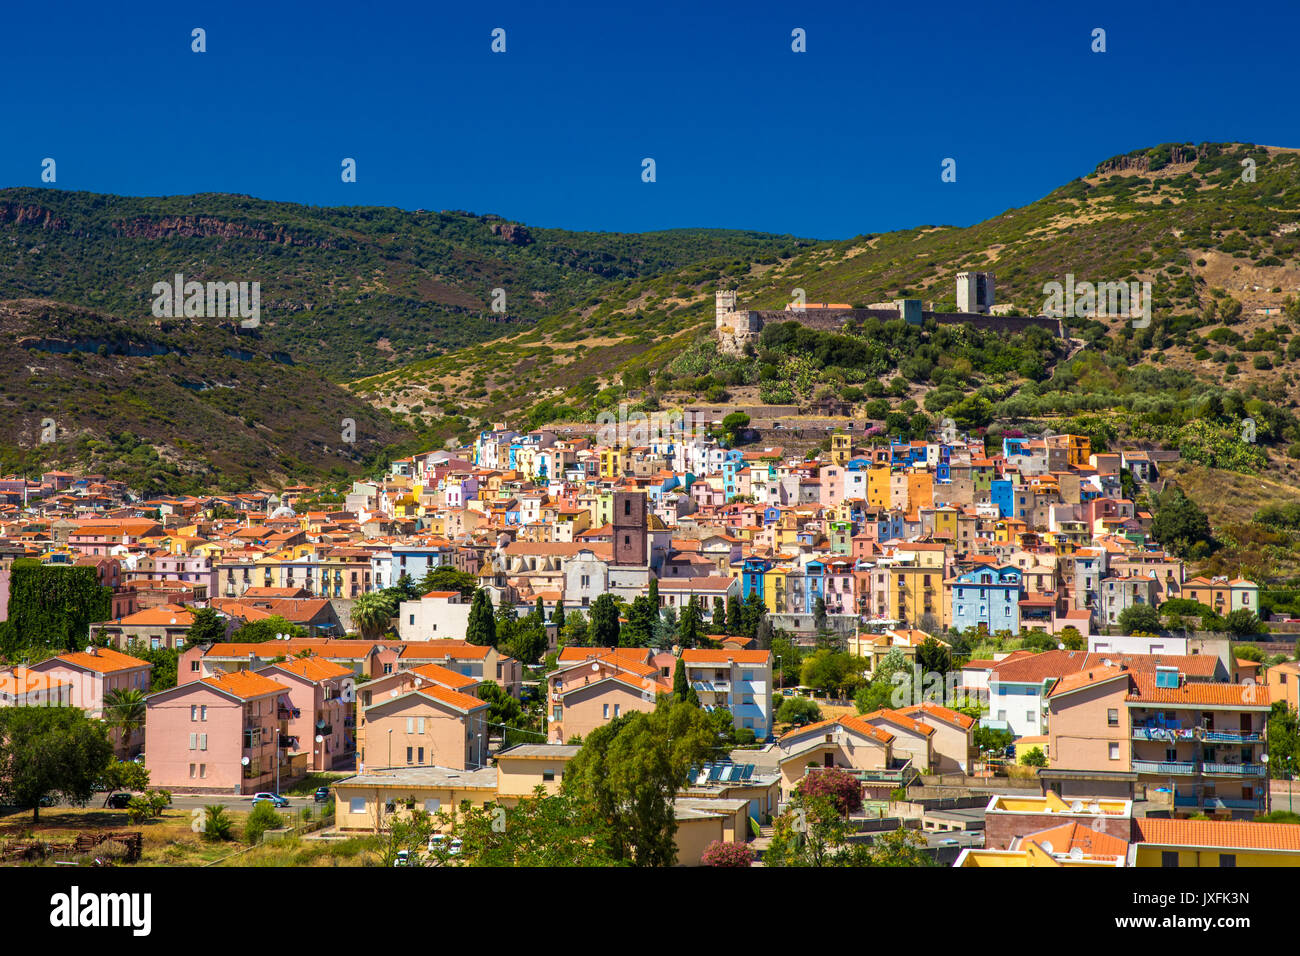 Bosa old city center with colorful houses and Fiume Temo river, Sardinia, Italy, Europe. Stock Photo